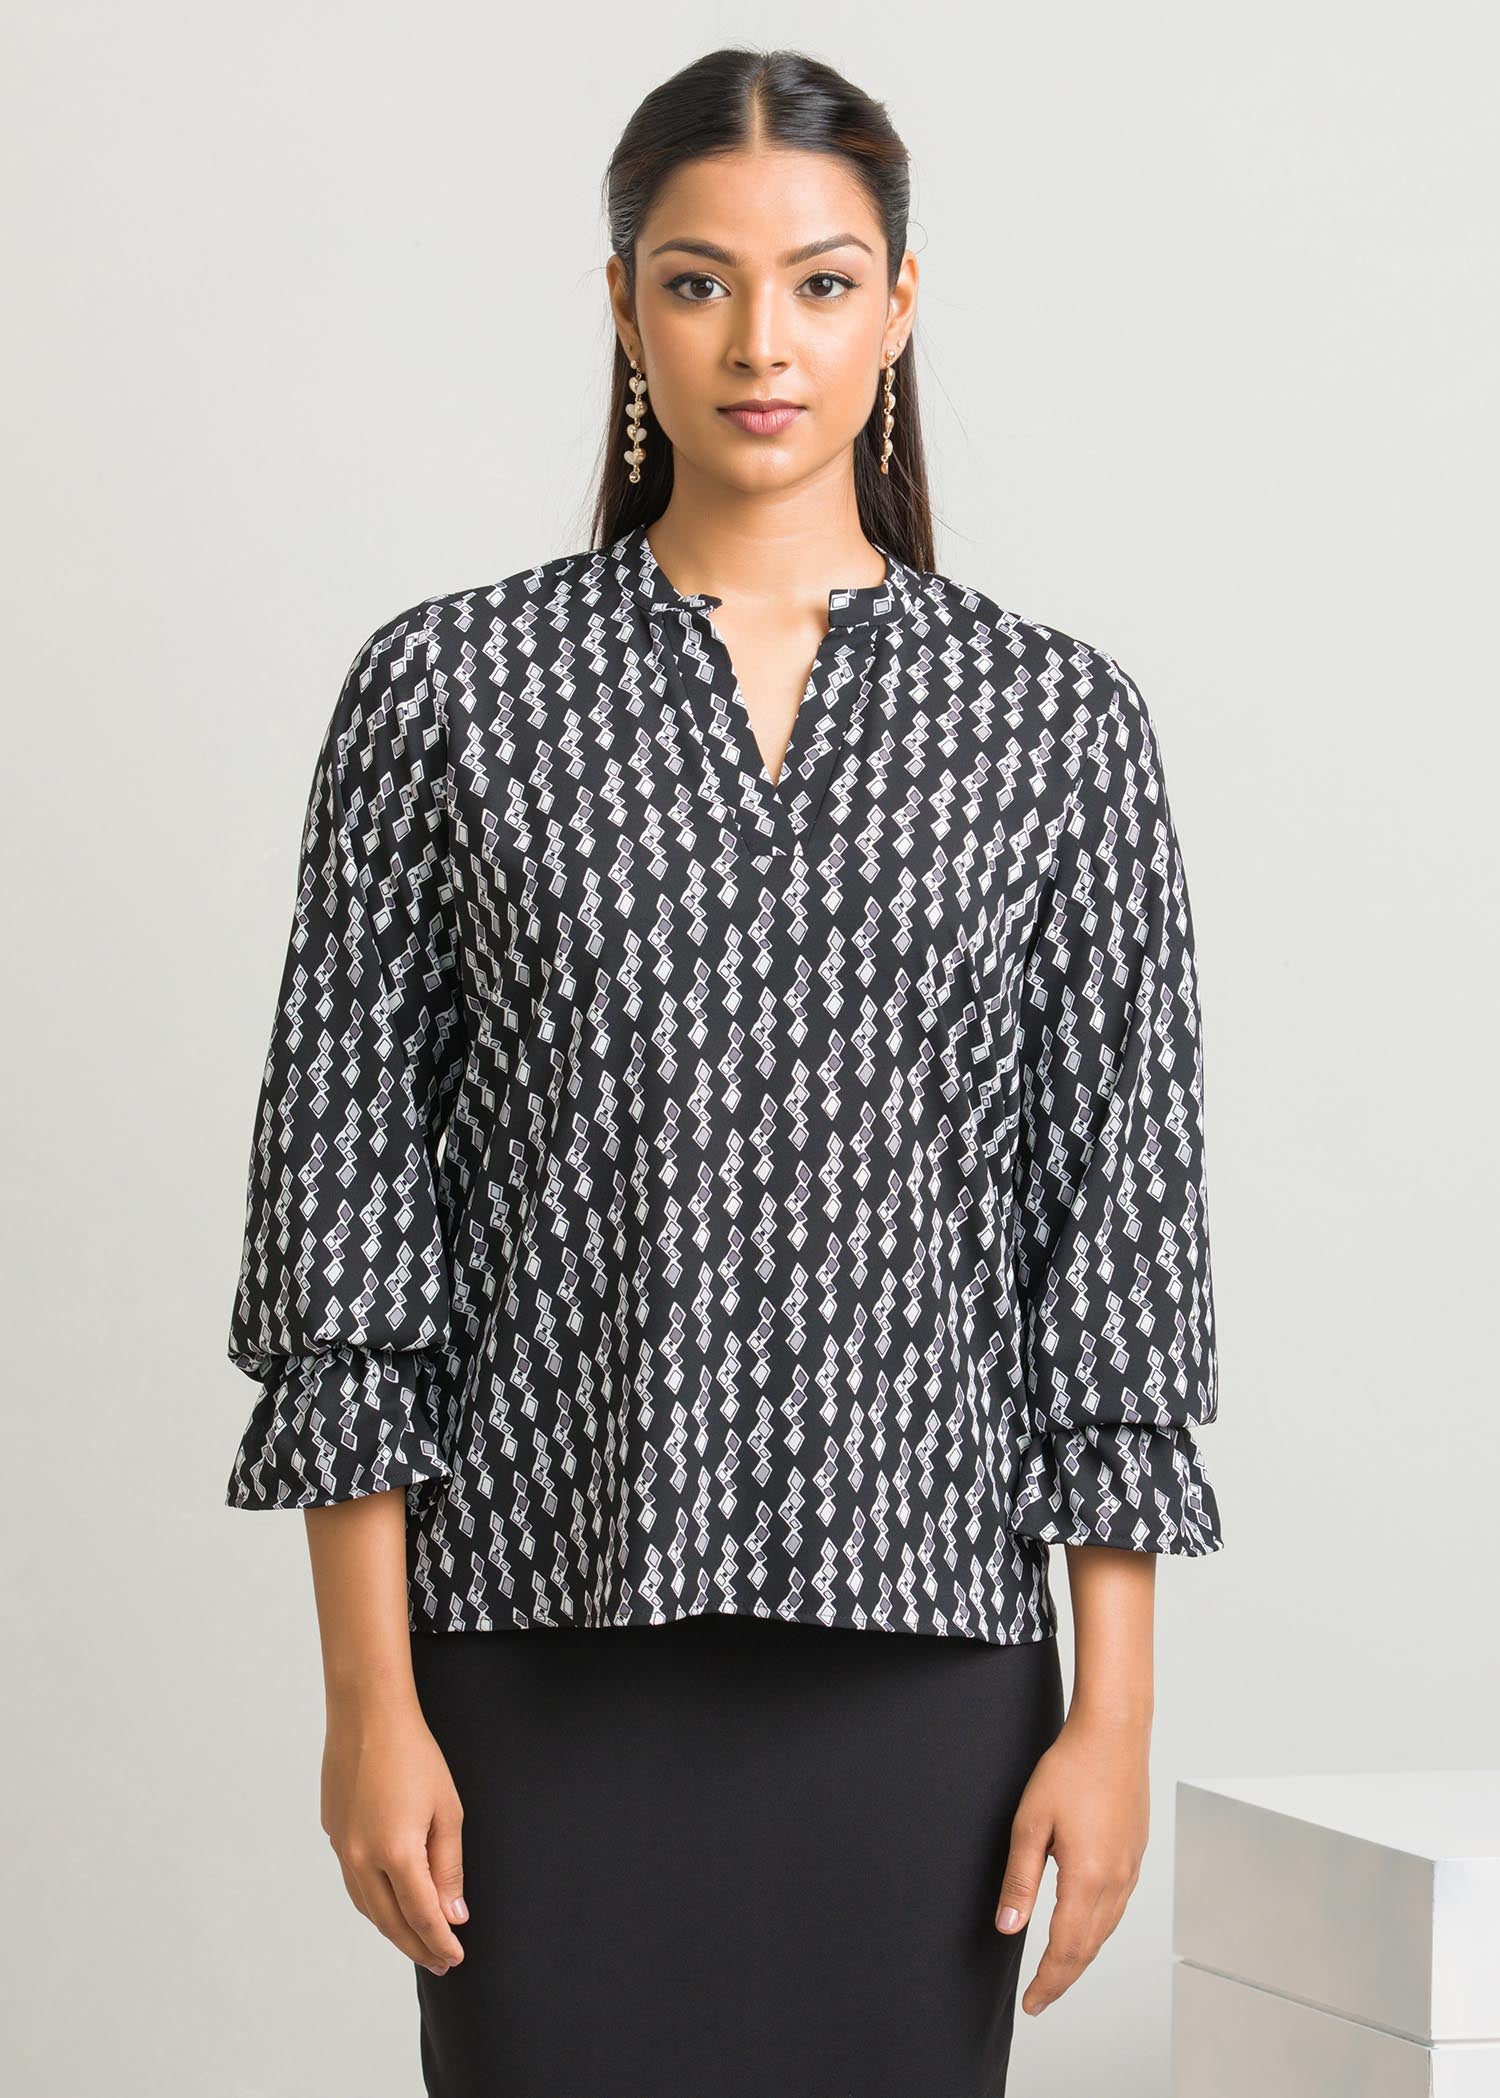 Printed blouse with puff sleeve